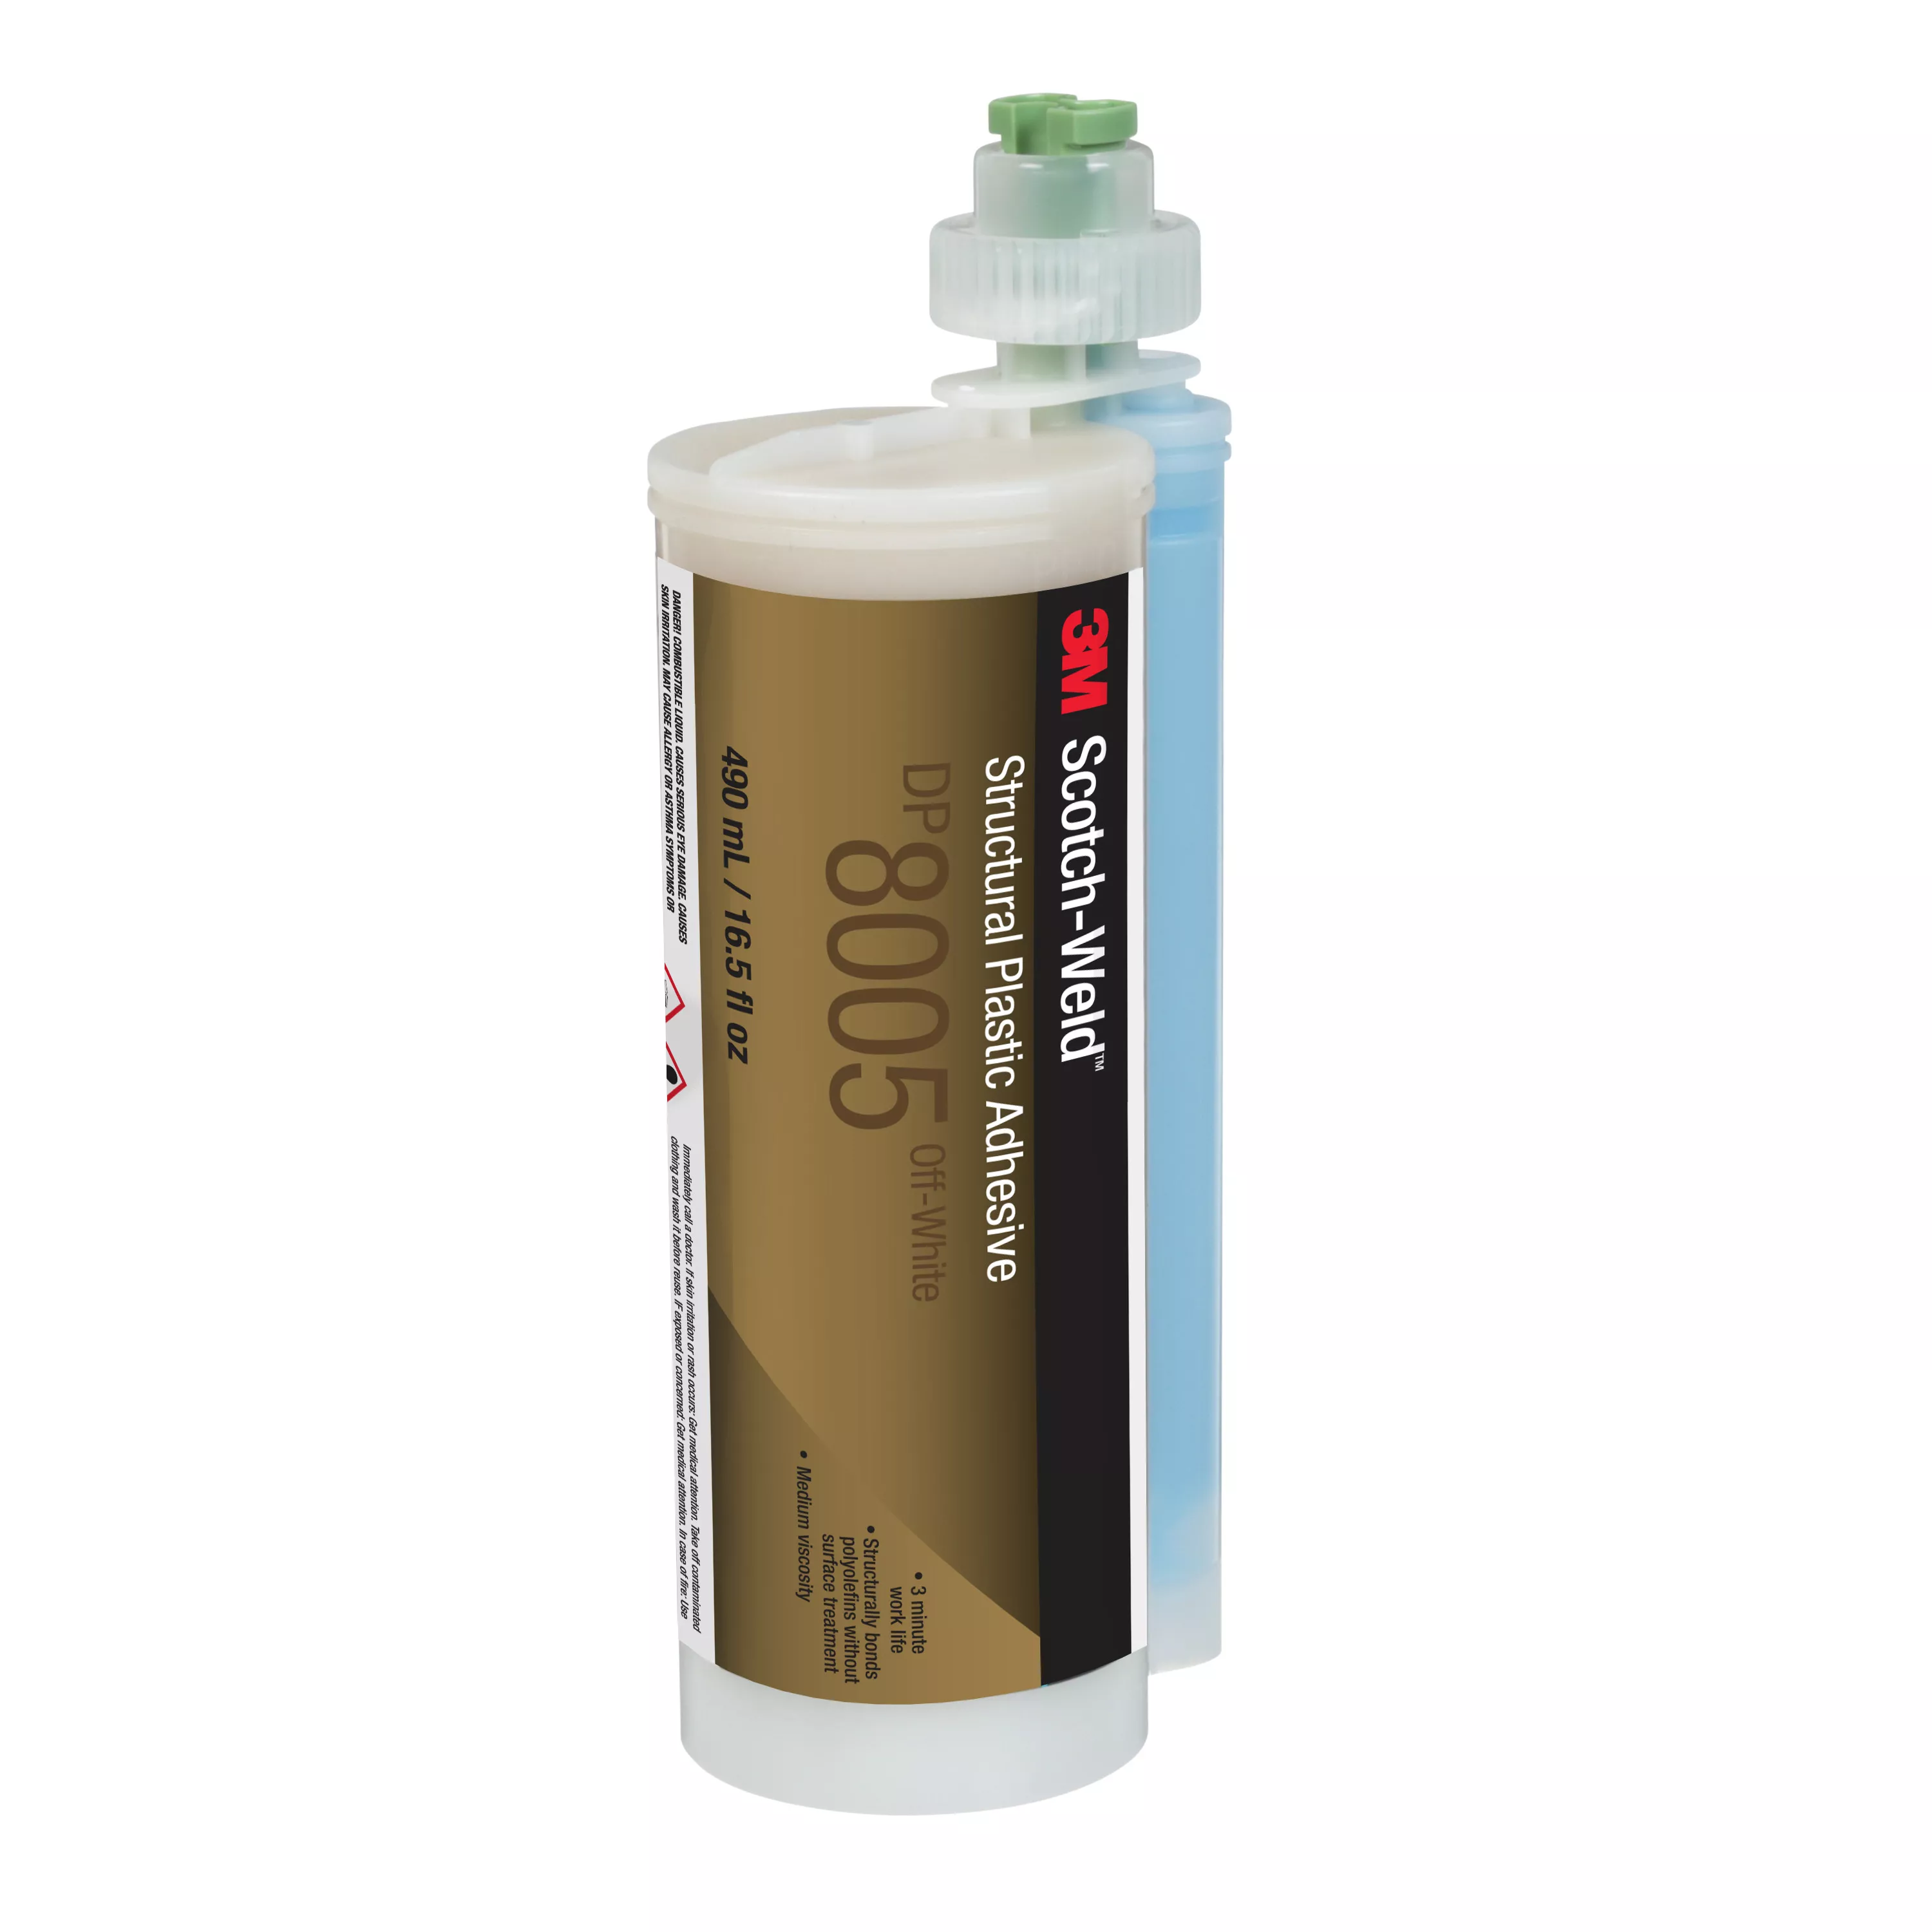 3M™ Scotch-Weld™ Structural Plastic Adhesive DP8005, Off-White, 490 mL
Duo-Pak, 6/case